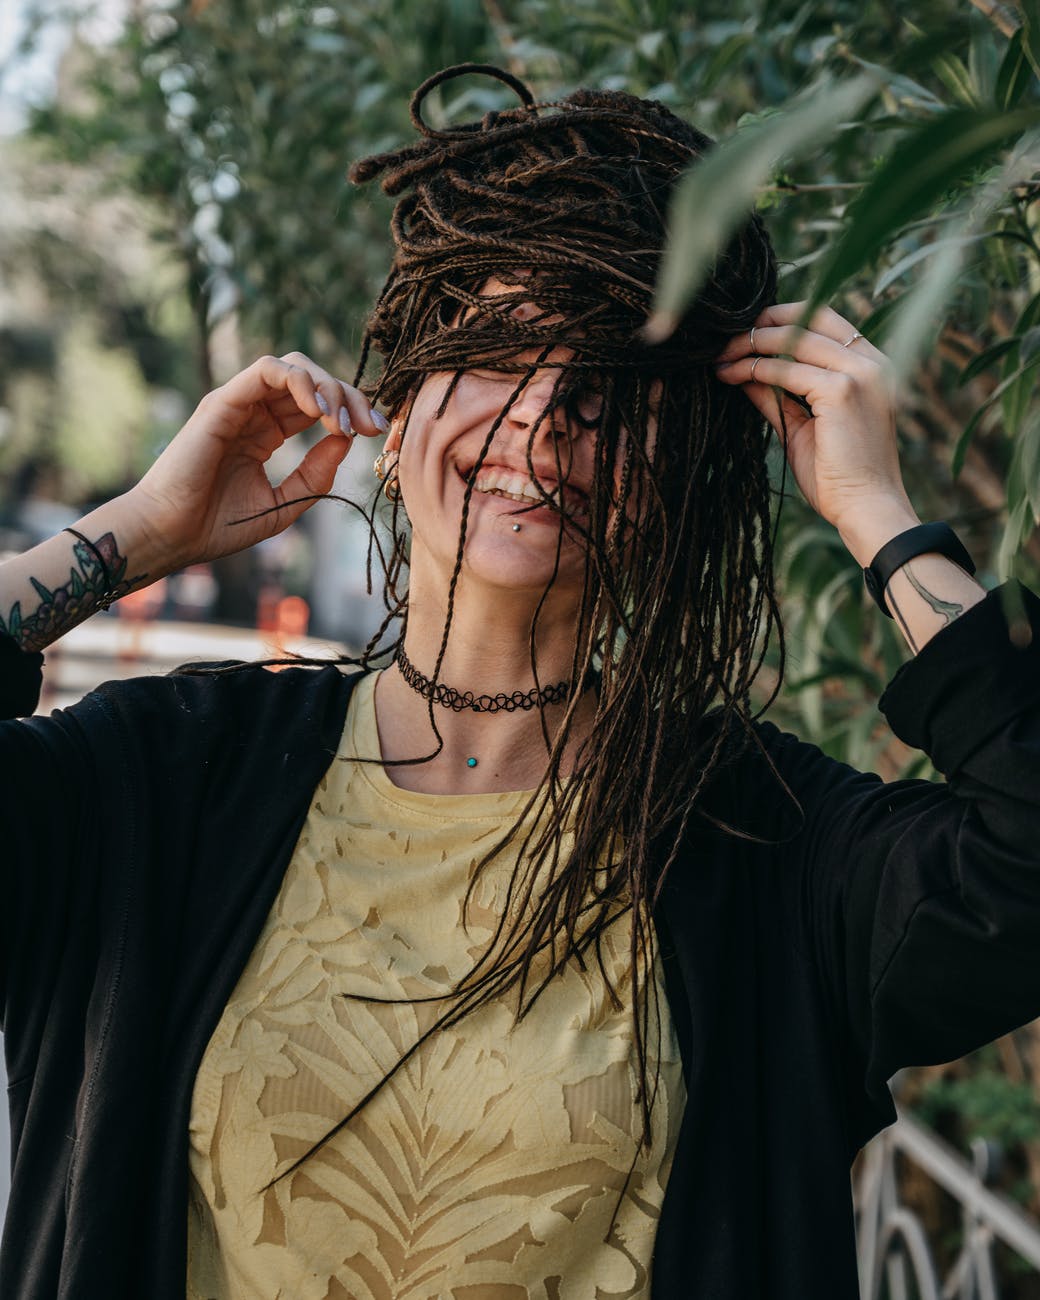 smiling woman with braids standing near green bush in daytime